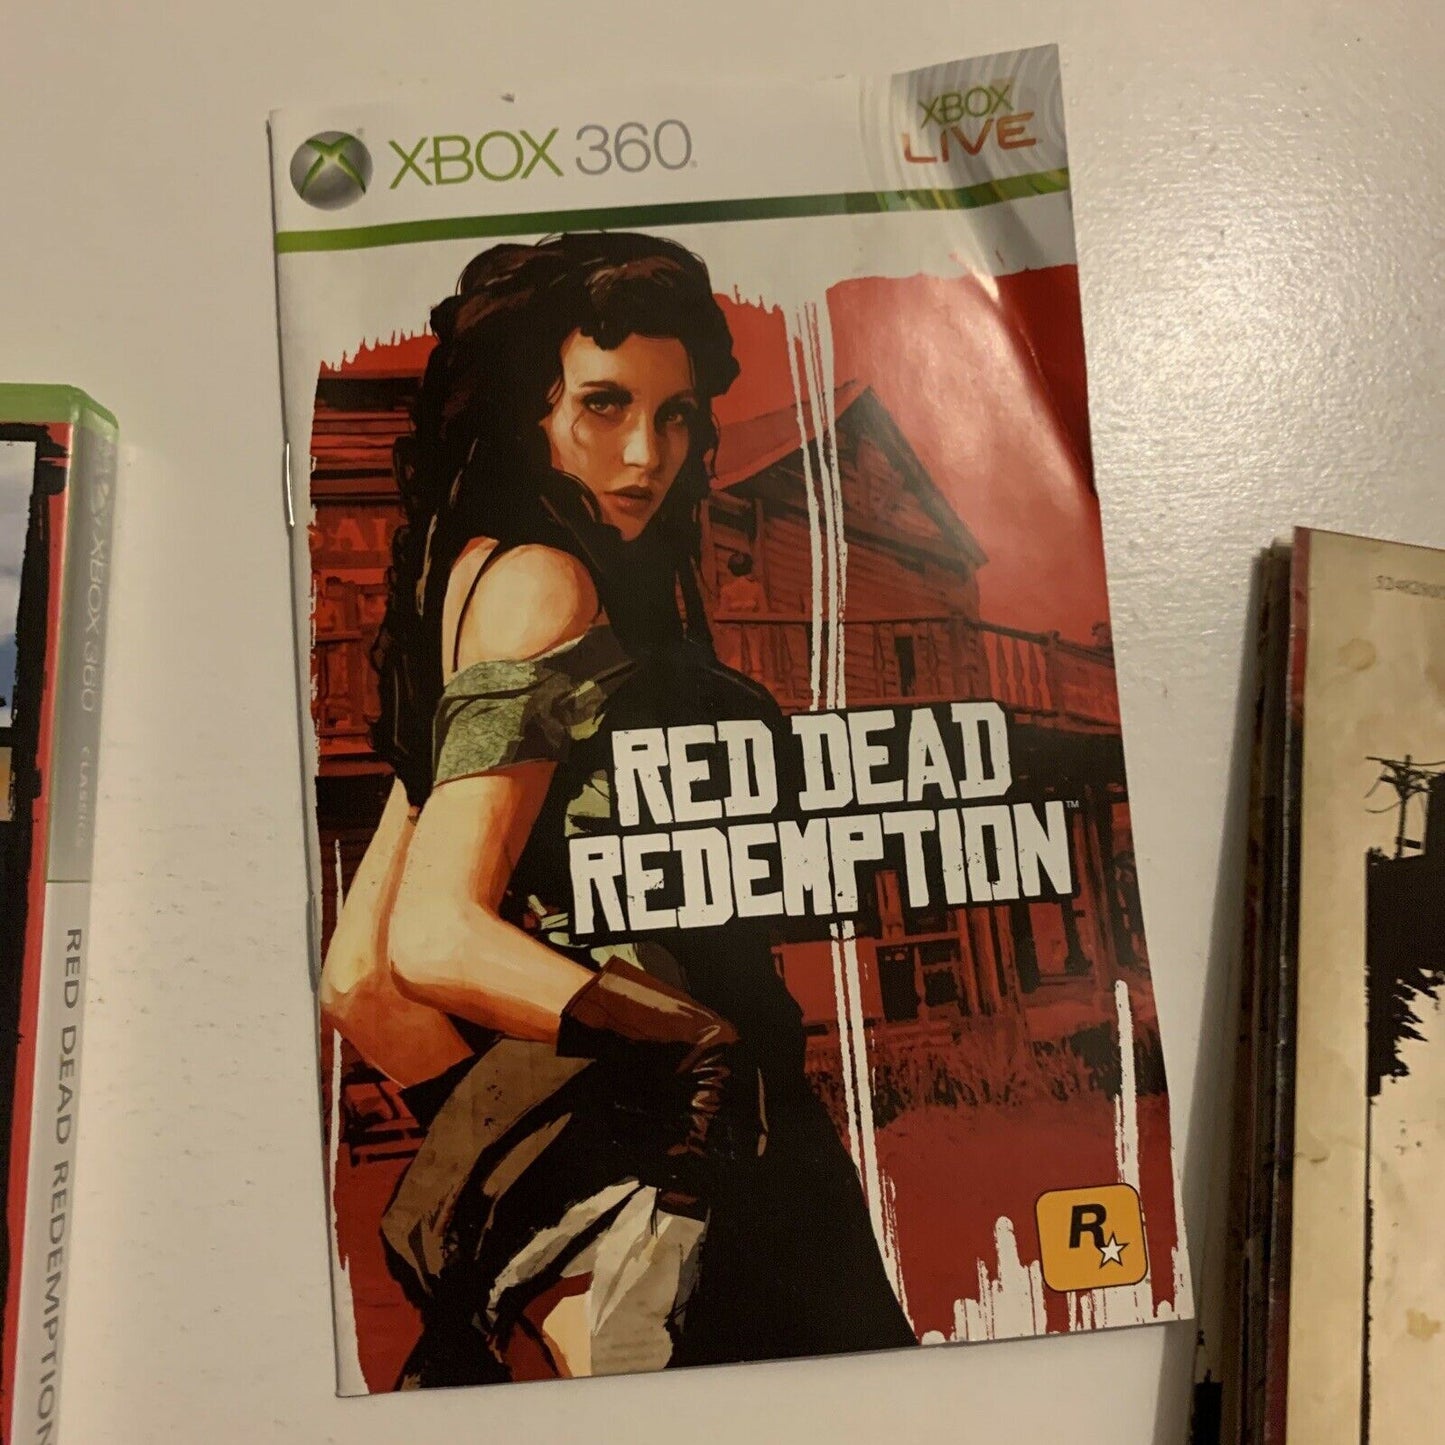 Red Dead Redemption - Microsoft XBOX 360 PAL Game With Manual And Map